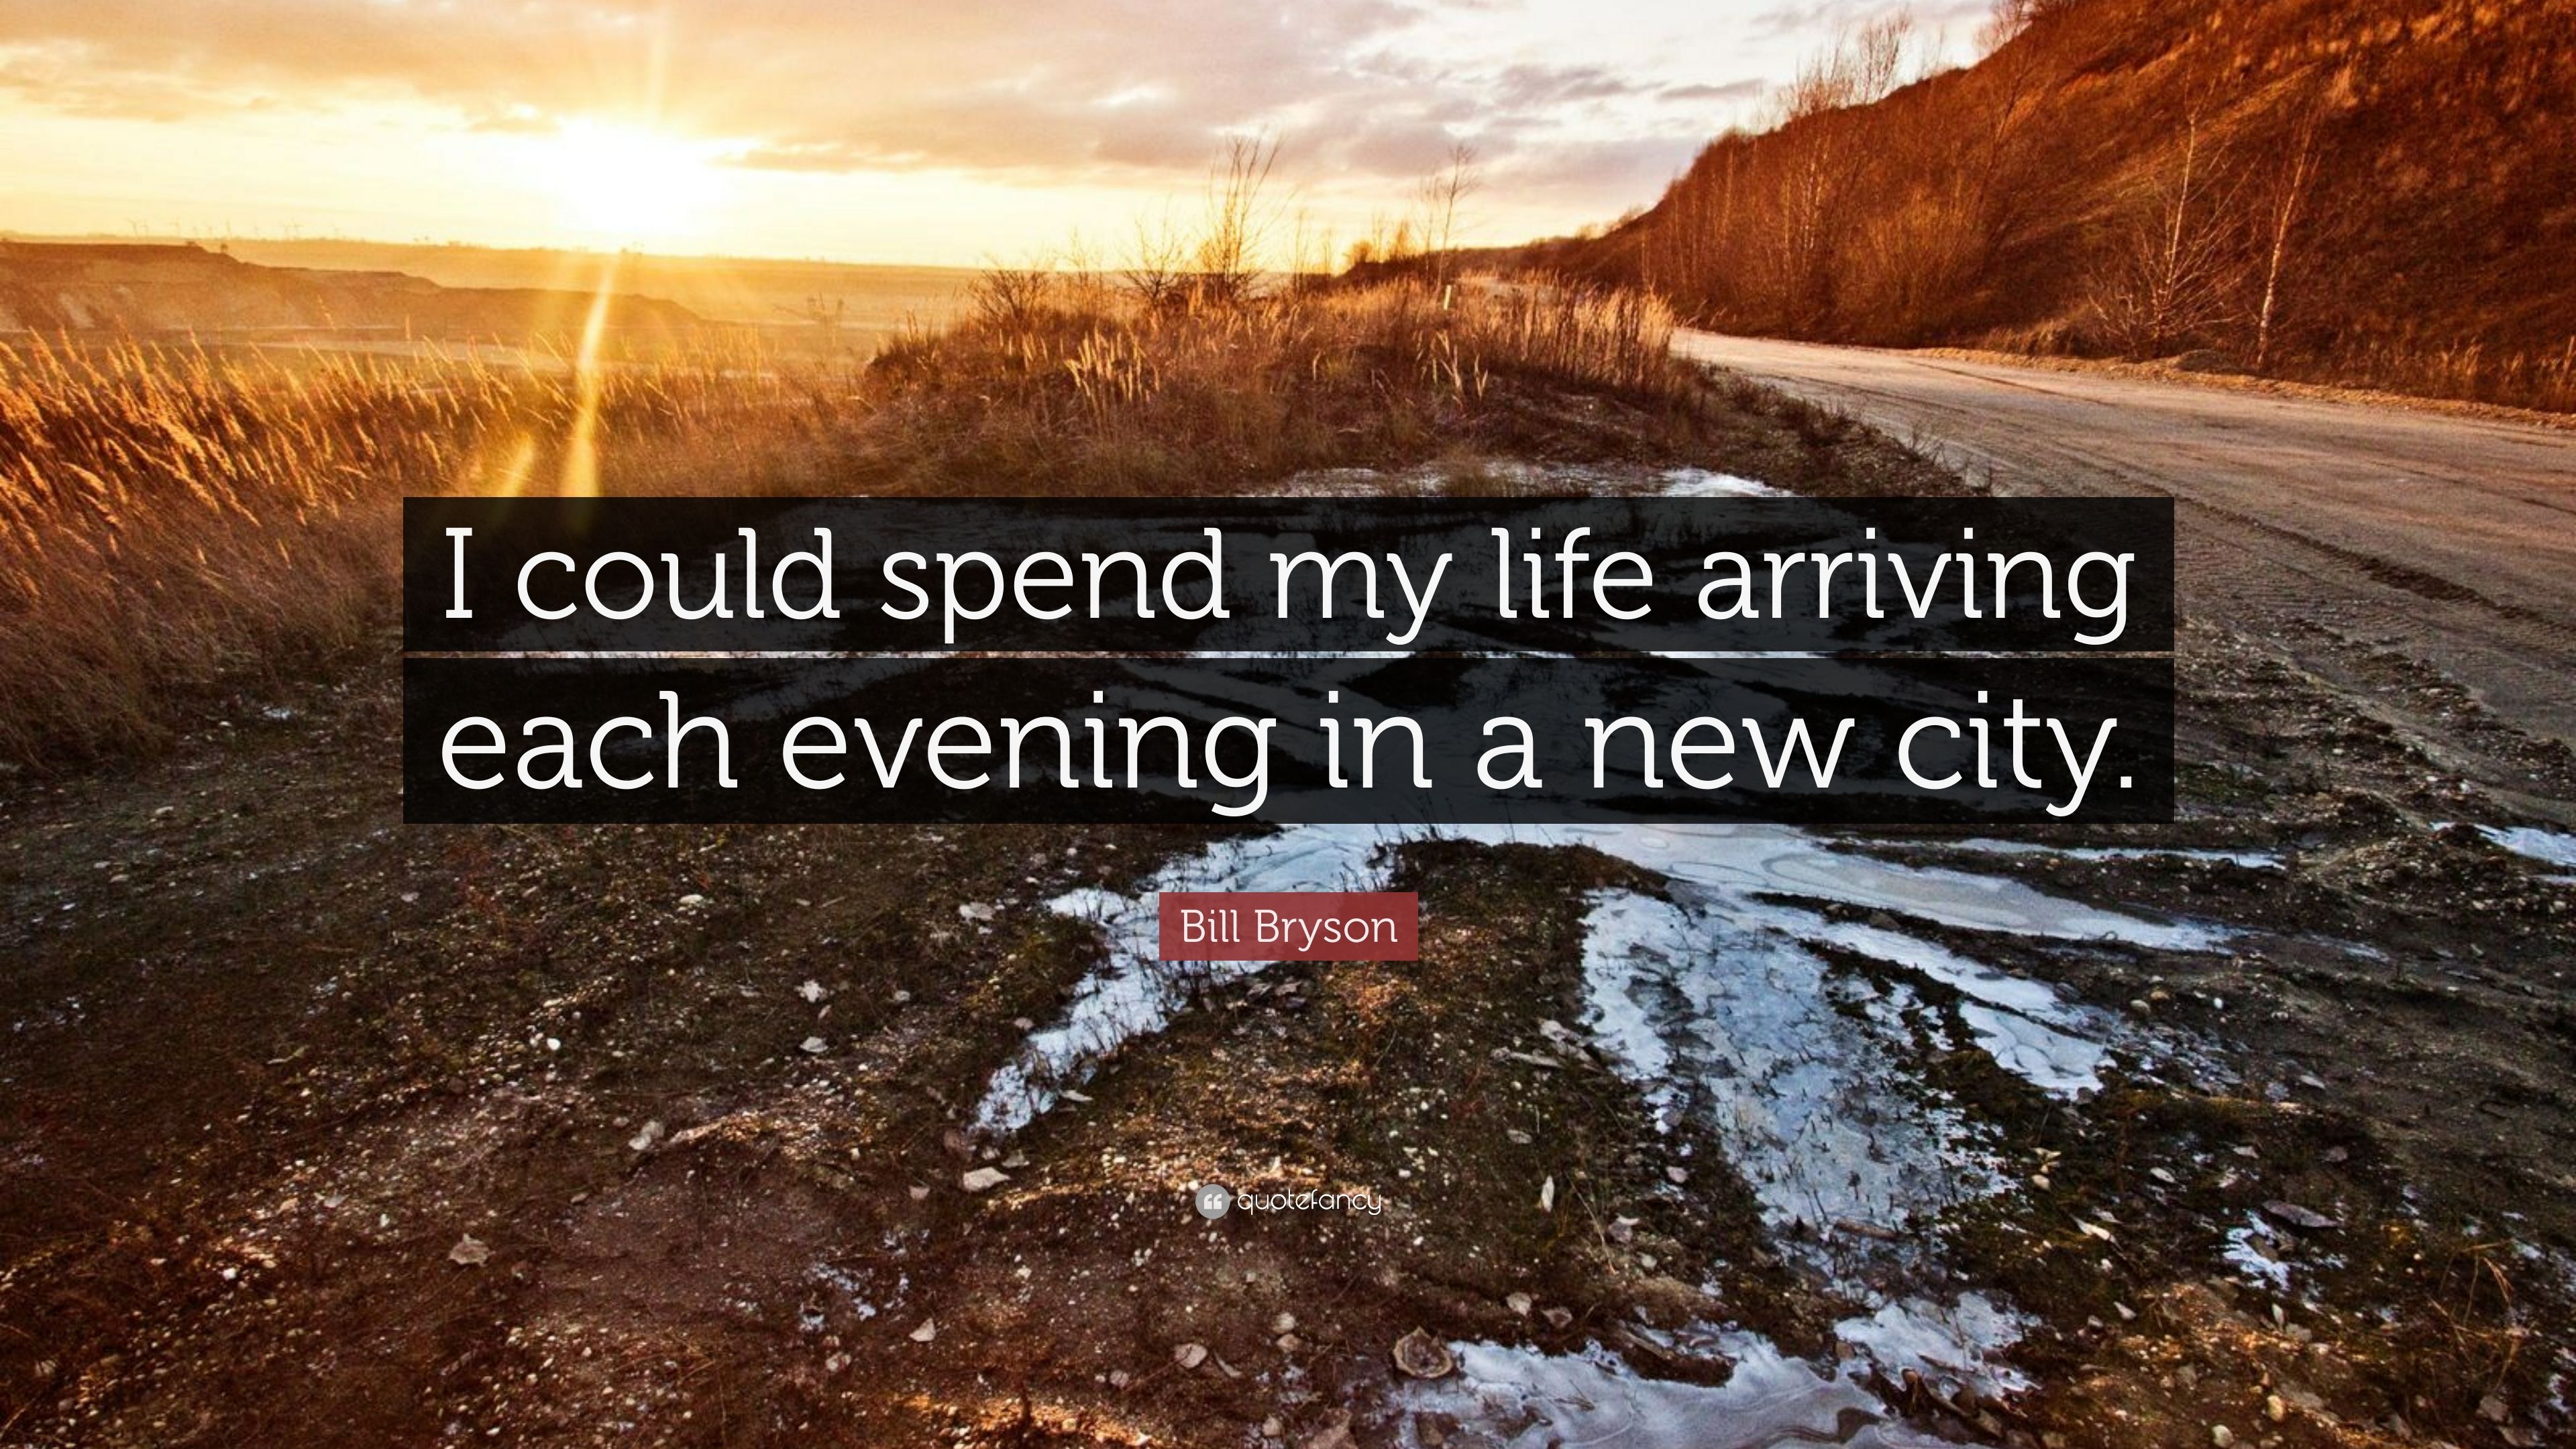 Bill Bryson Quote: “I could spend my life arriving each evening in a ...